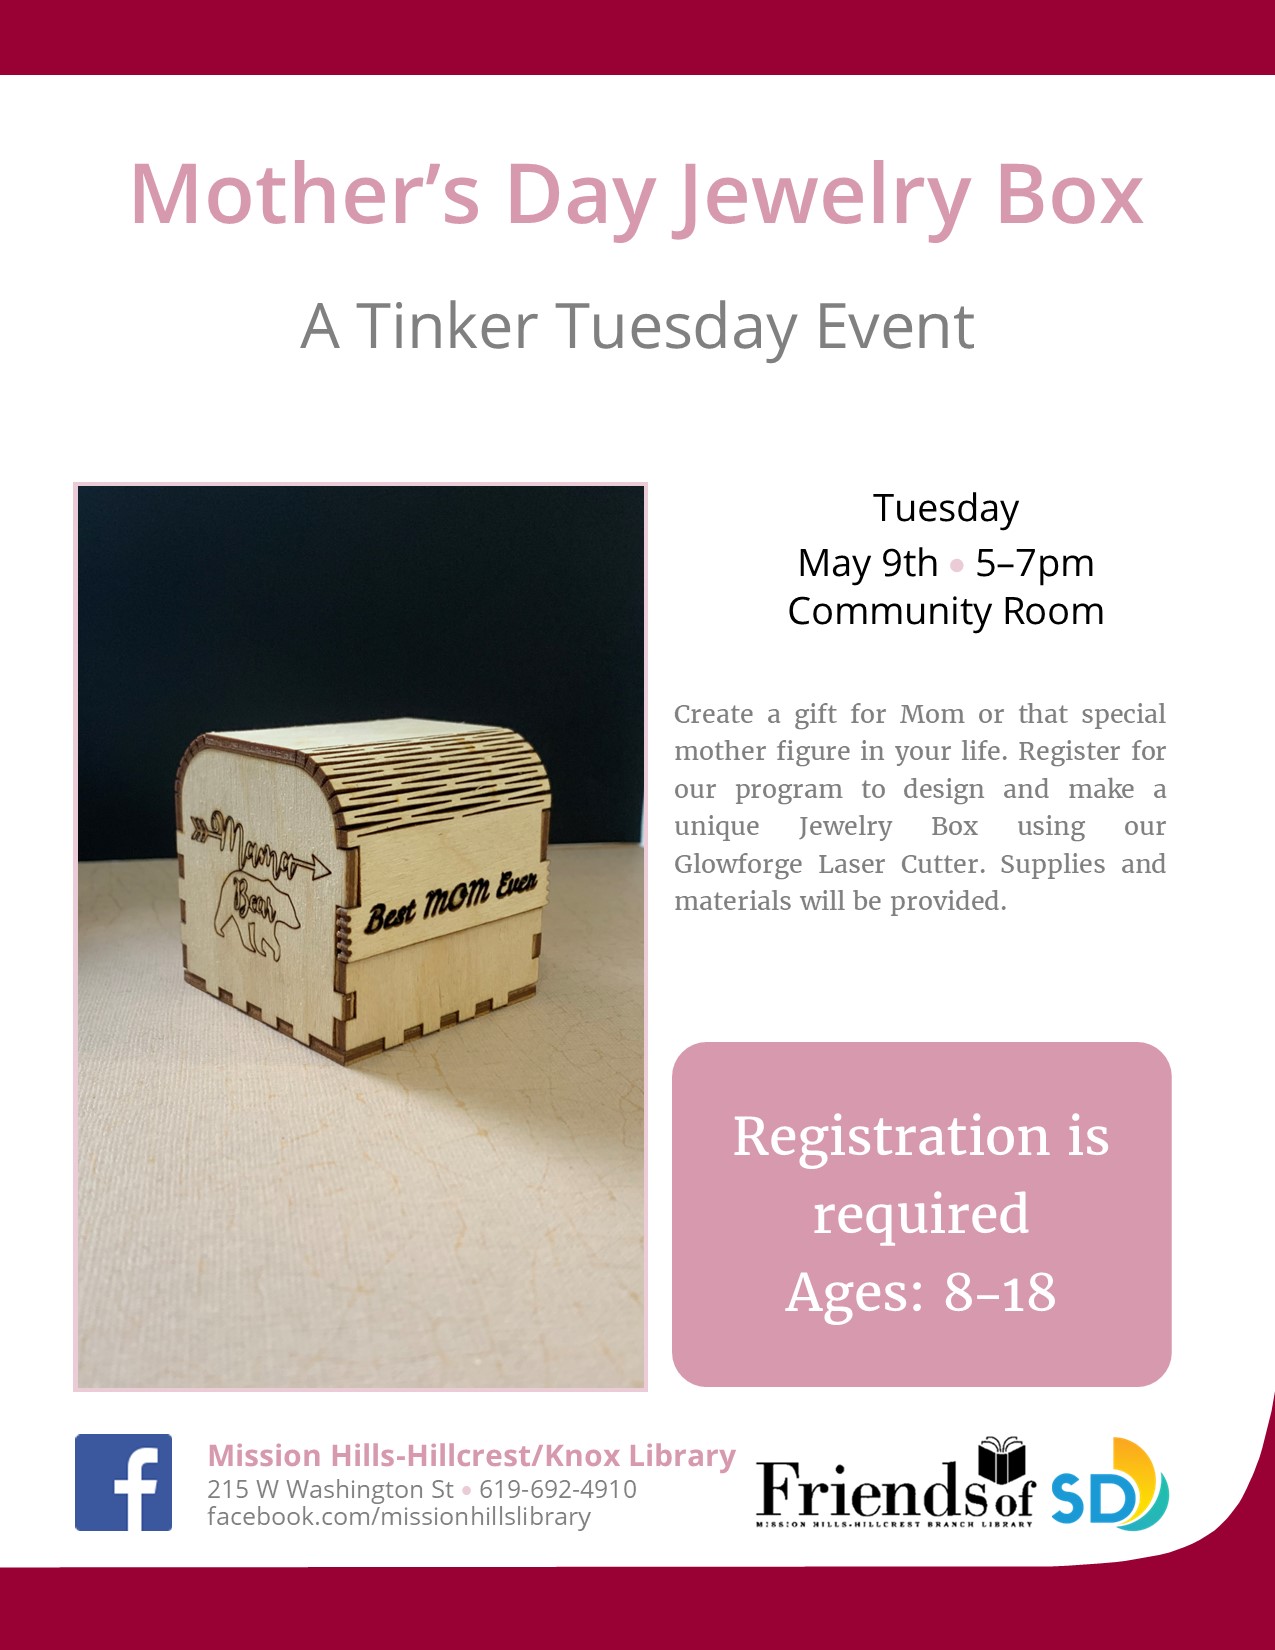 Mother’s Day Jewelry Box: A Tinker Tuesday Event